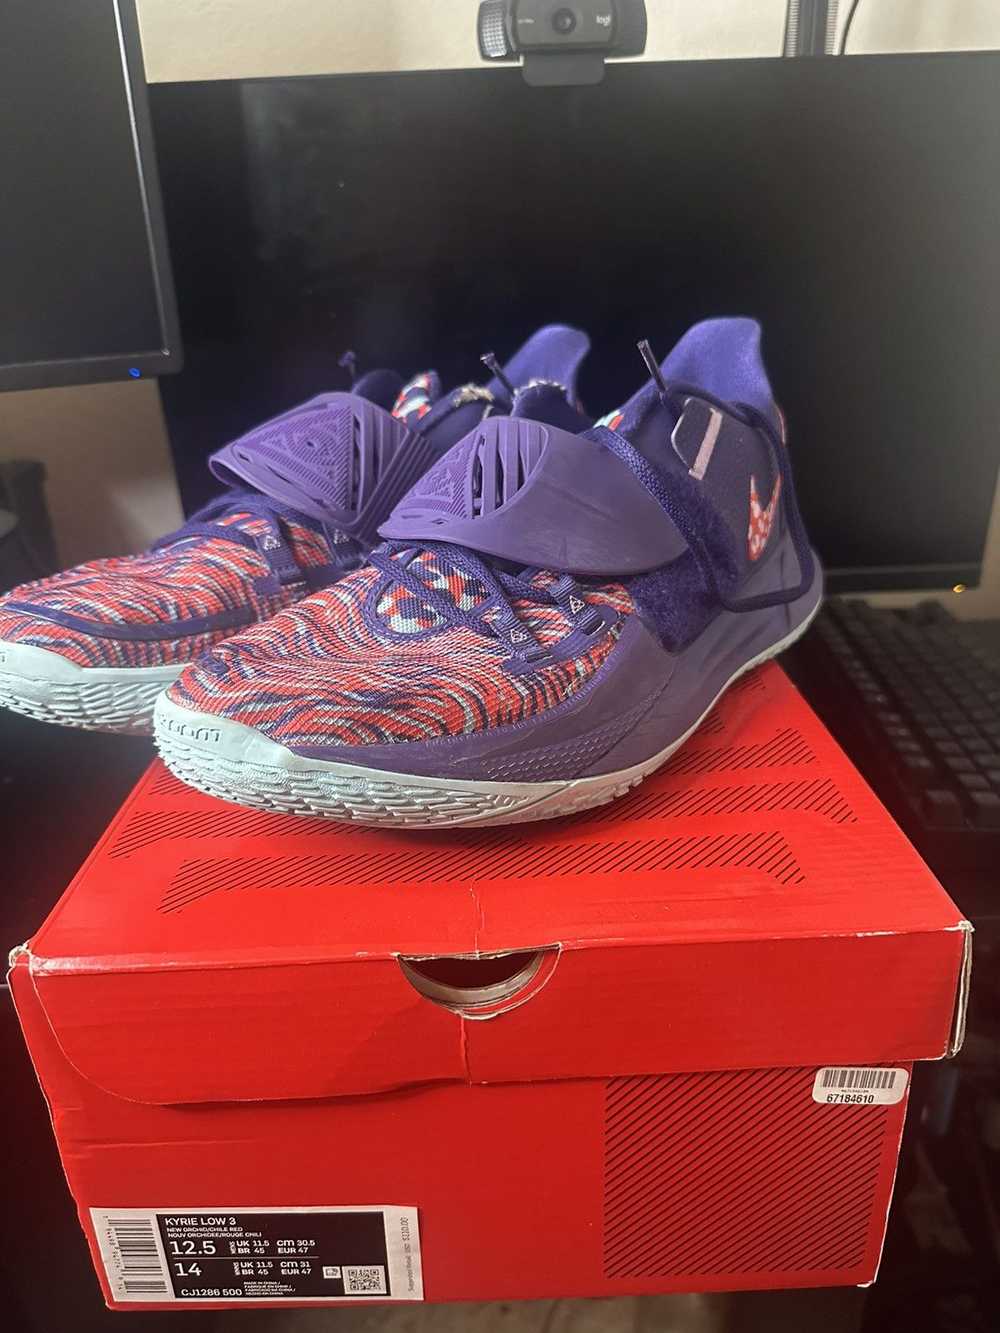 Nike Kyrie Low 3 "Orchid" - image 2